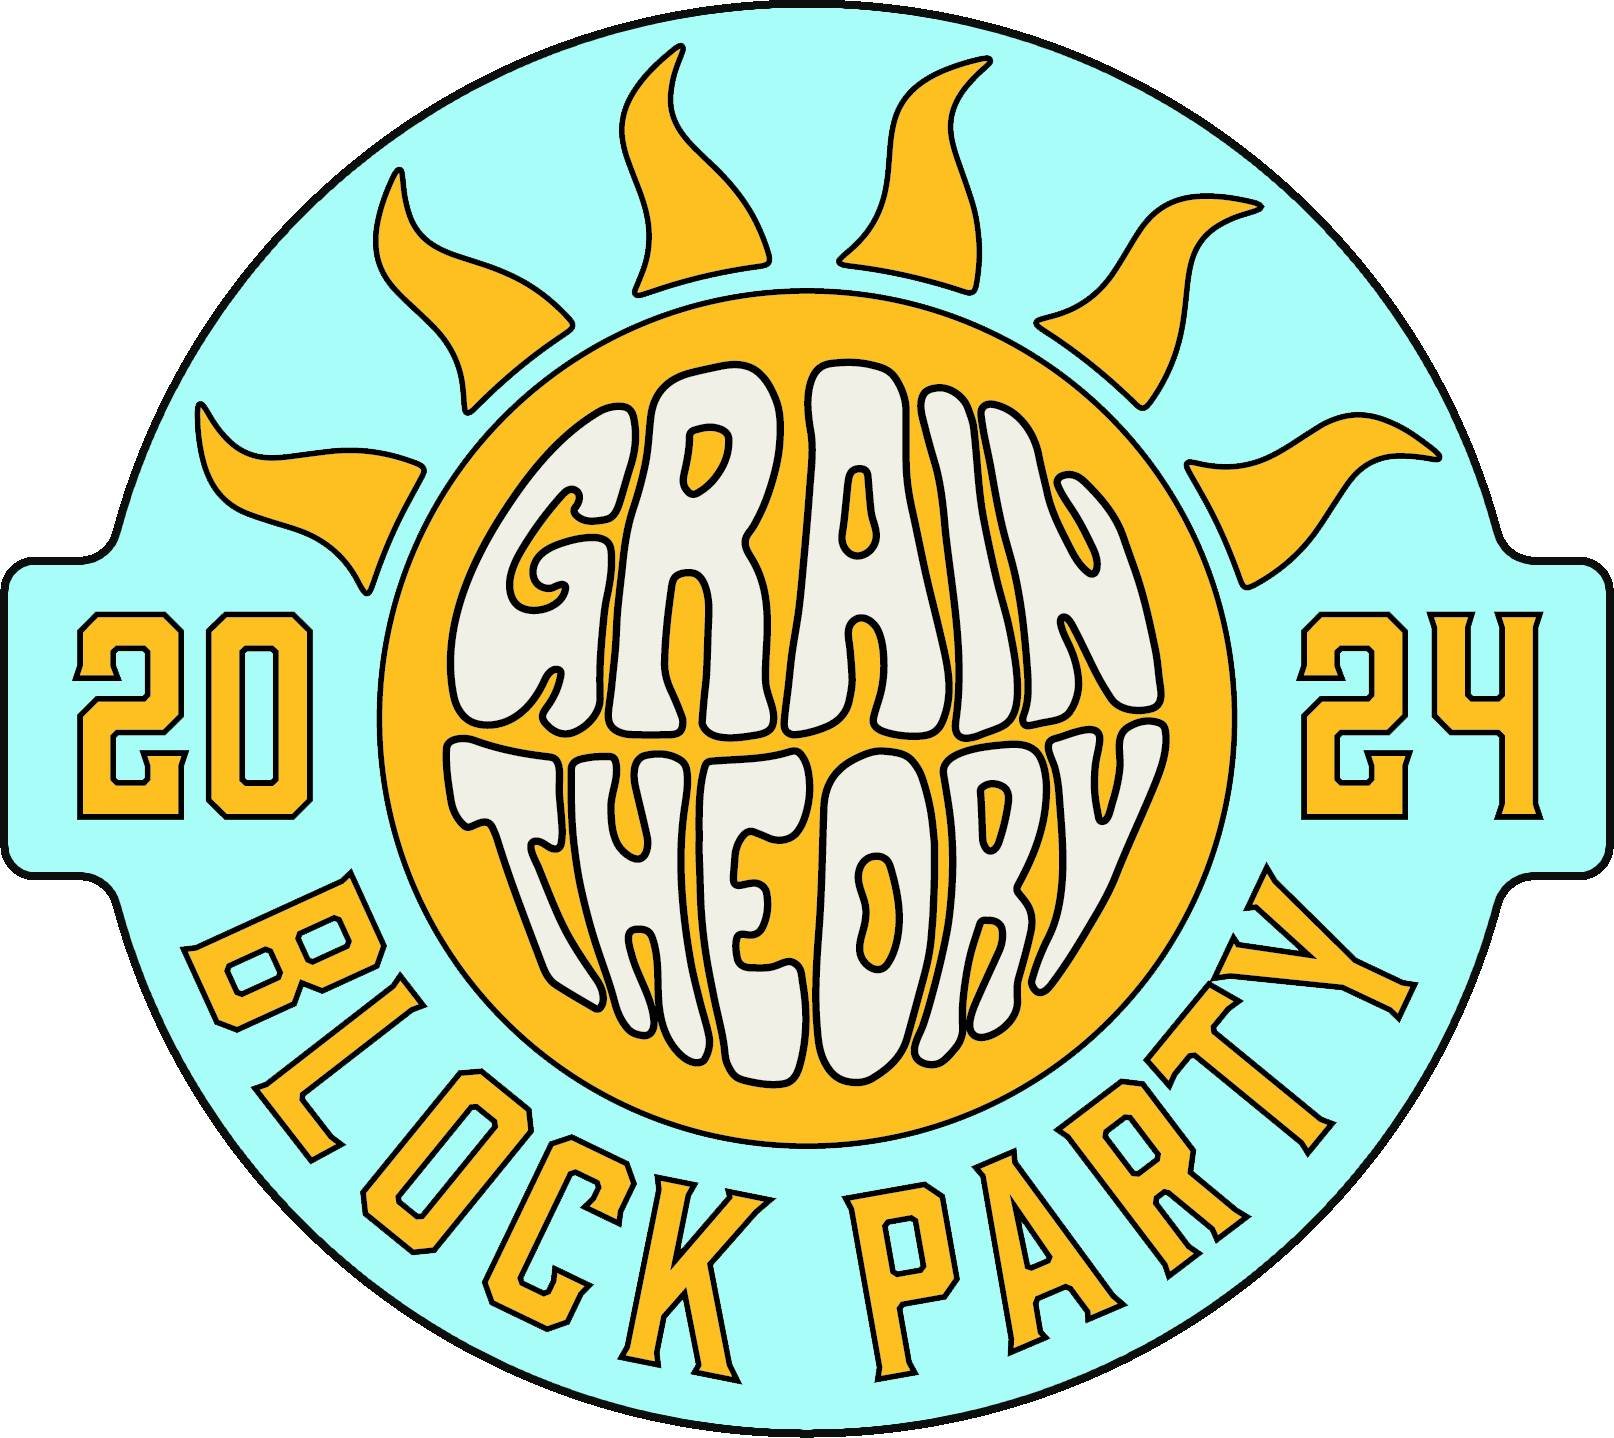 It's that time!! Block Party is back and better (and earlier) than ever! We&rsquo;re moving up the date to beat the heat and kick off summer right! Join us June 1st down on 2nd street for food, fun, live music, and of course the best brews in town. ?